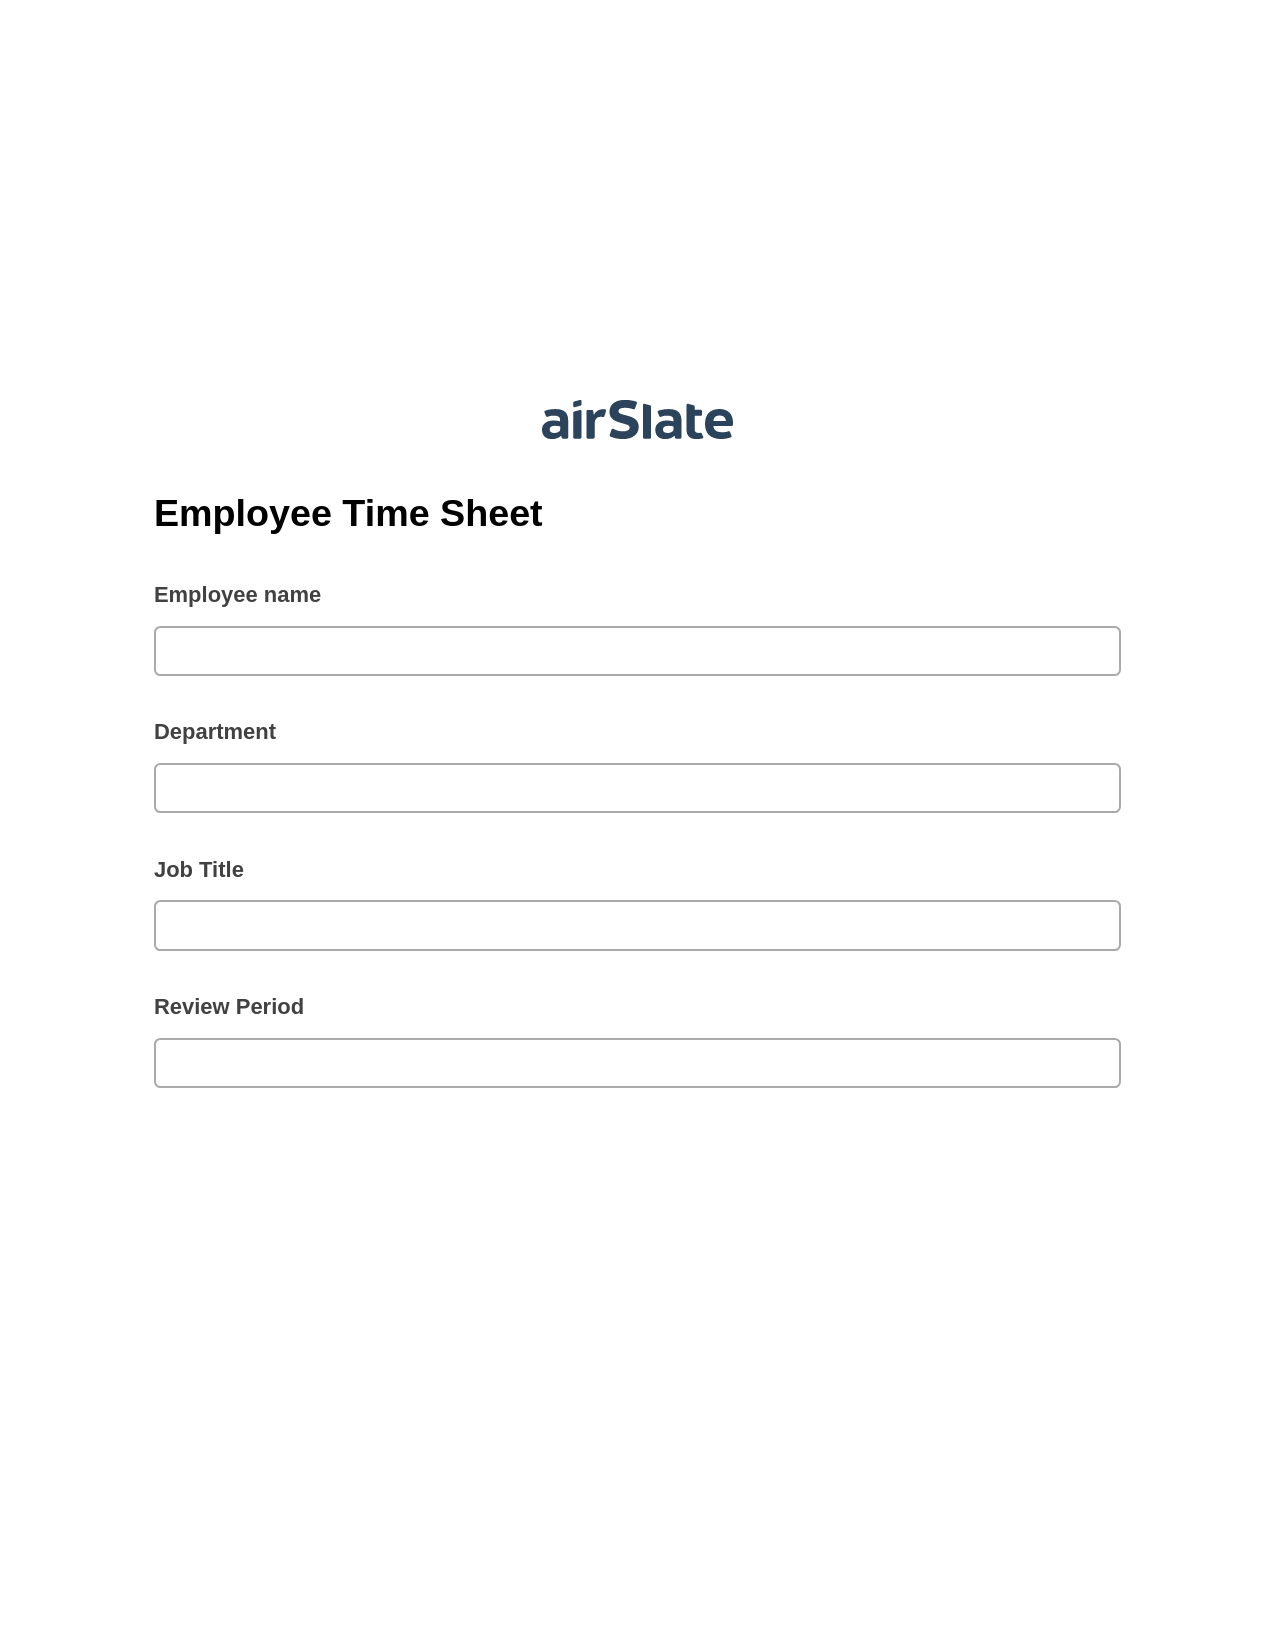 Multirole Employee Time Sheet Pre-fill Dropdowns from Excel Bot, Update Audit Trail Bot, Export to Smartsheet